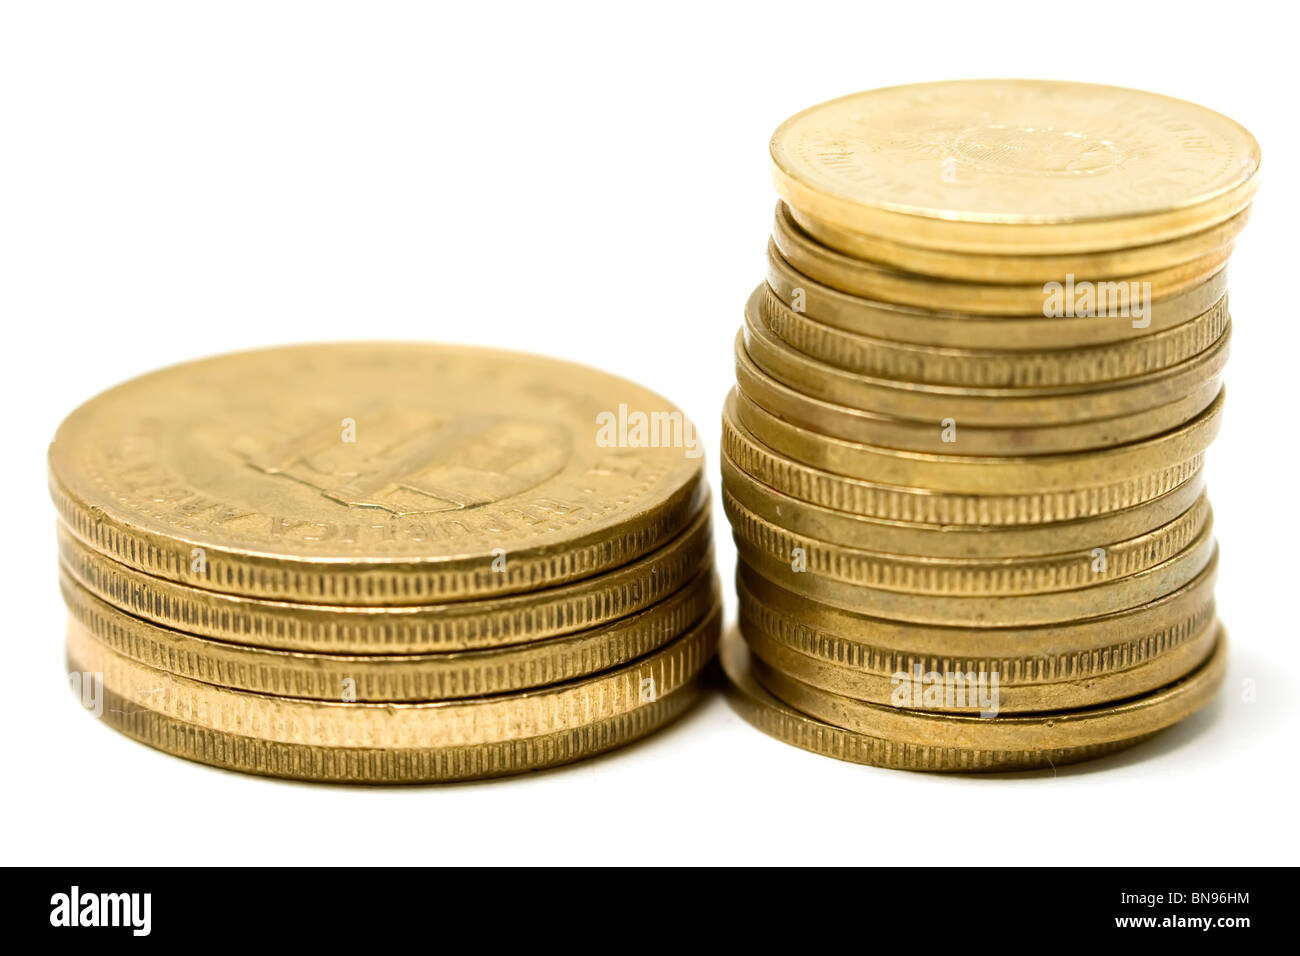 Golden argentine coins stack over white background Stock Photo